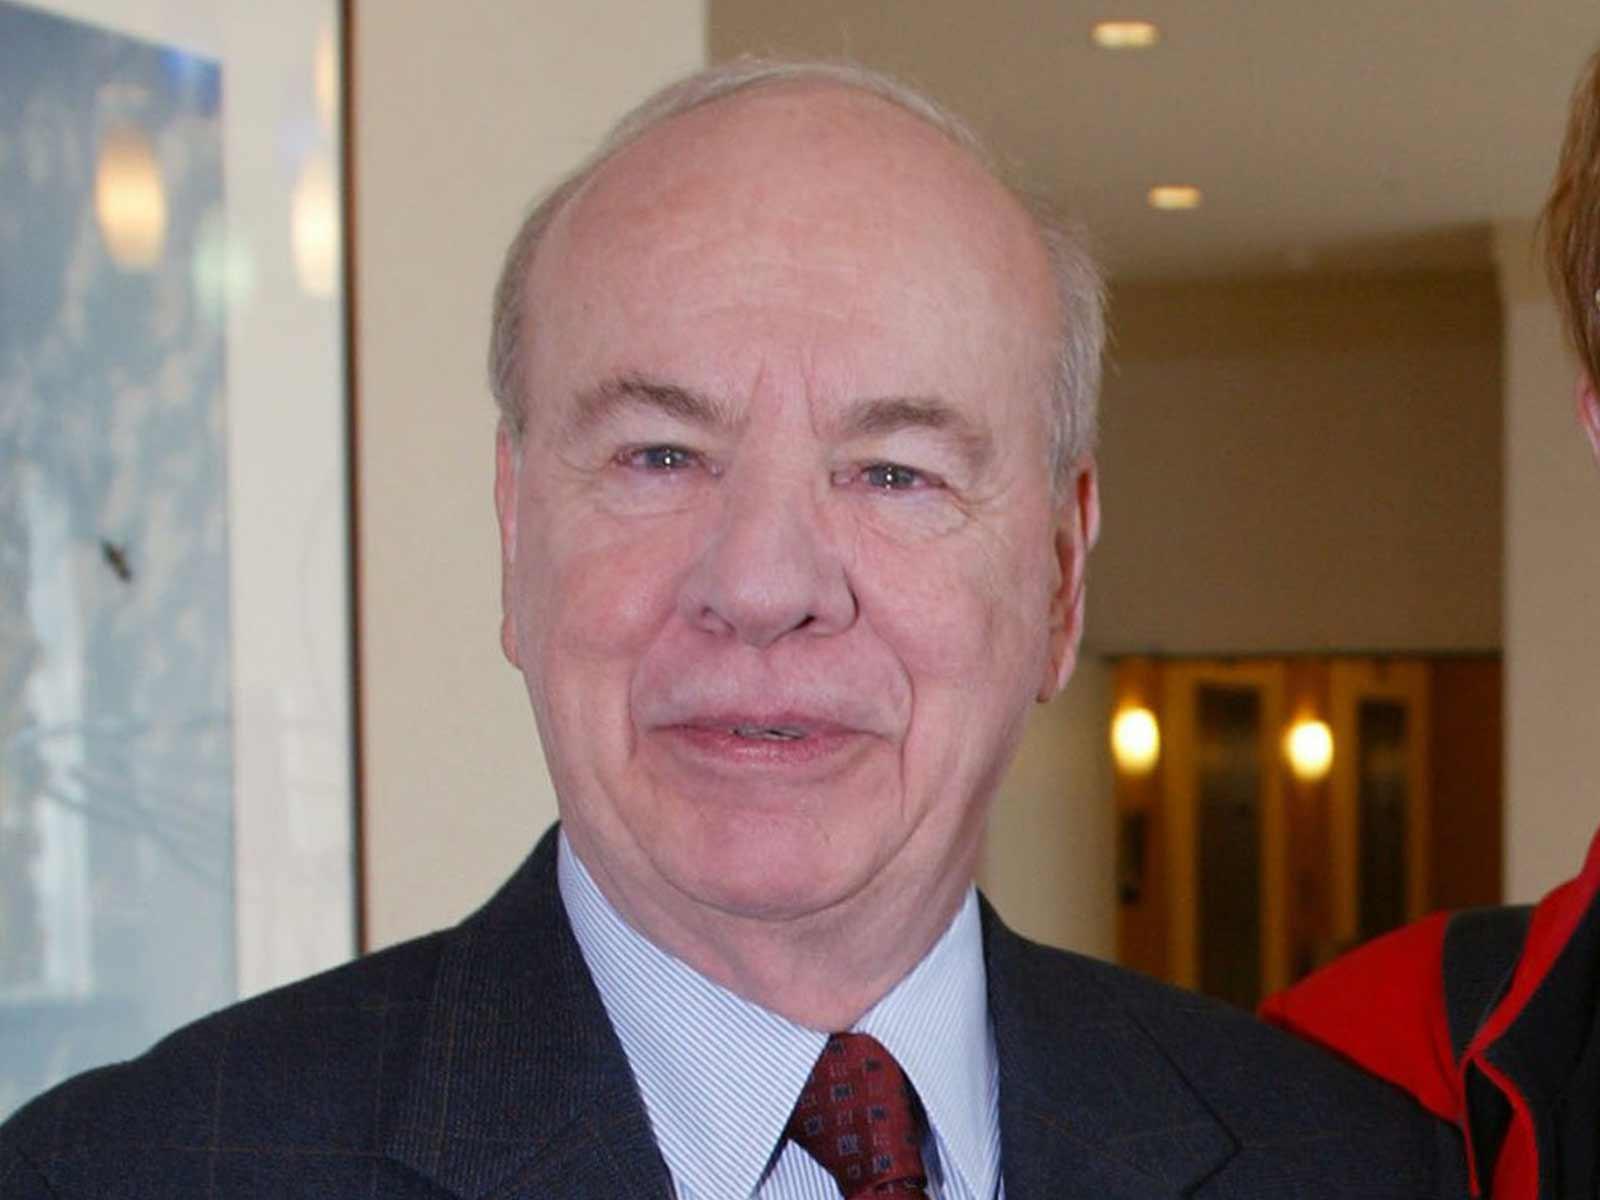 Tim Conway’s Wife Accuses Daughter of Using ‘Fabricated’ Medical Report in Fight Over Comedian’s Treatment